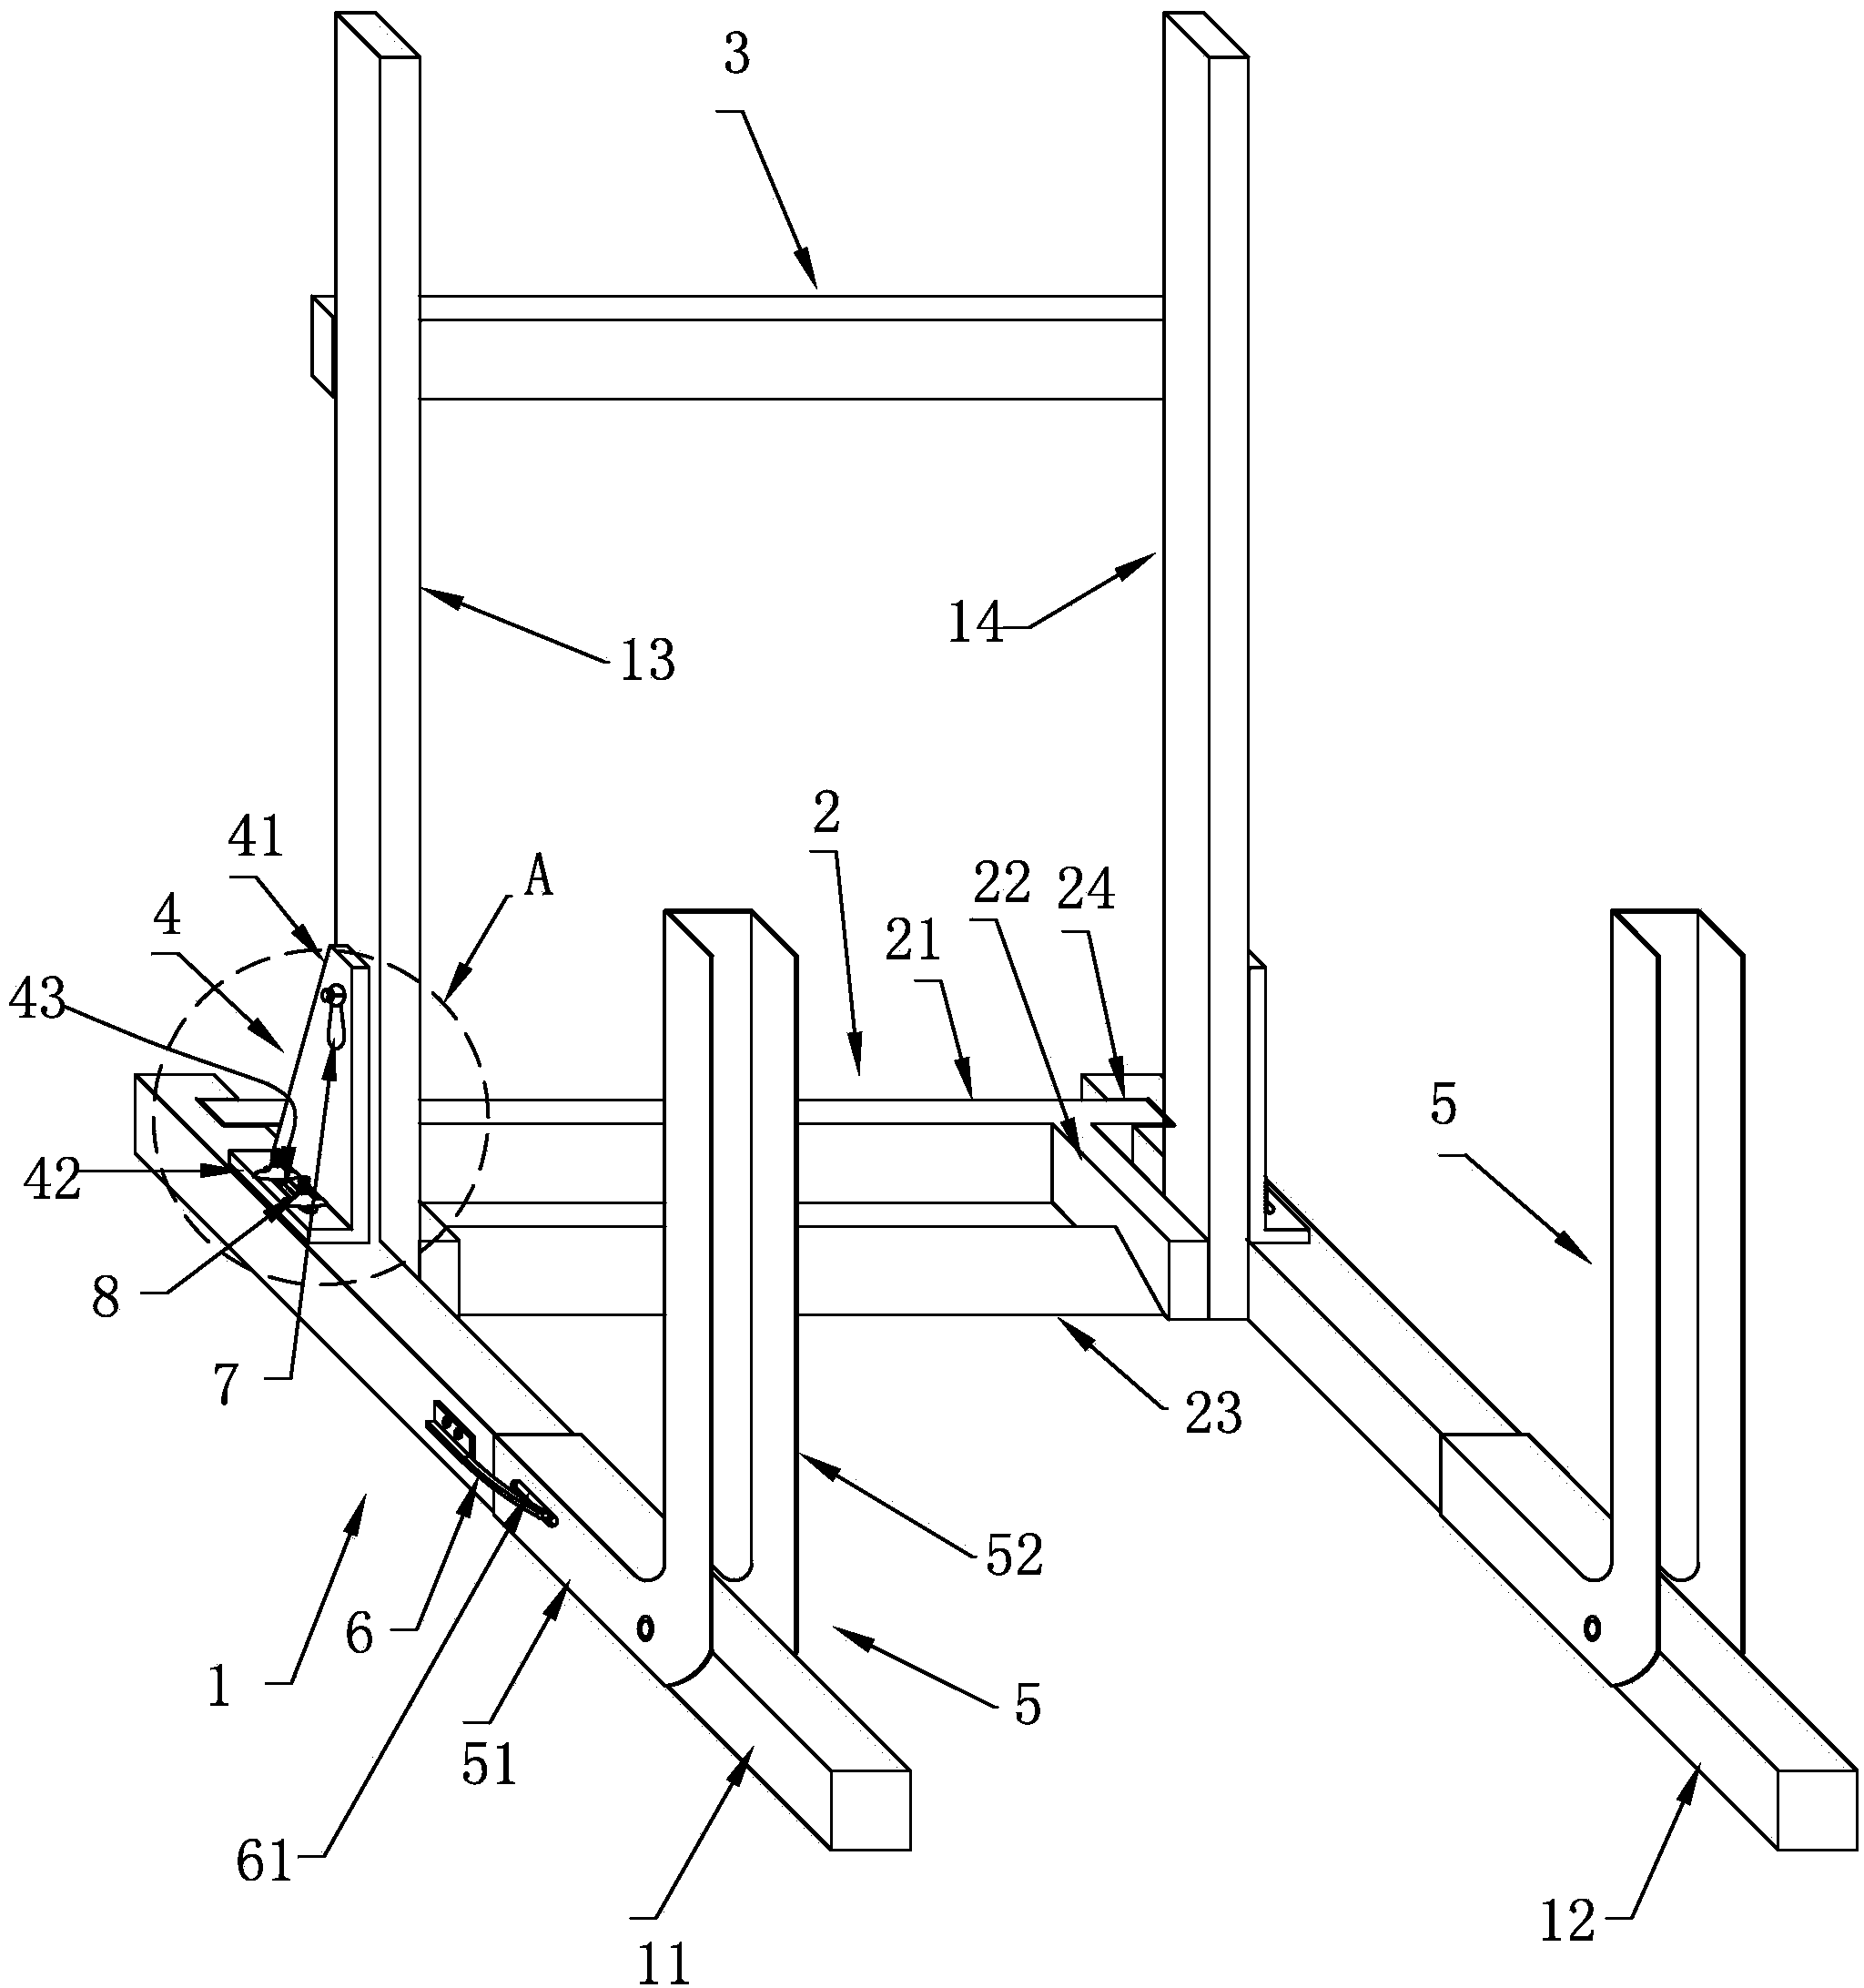 Bracket capable of quickly stacking and ordering construction inventory materials